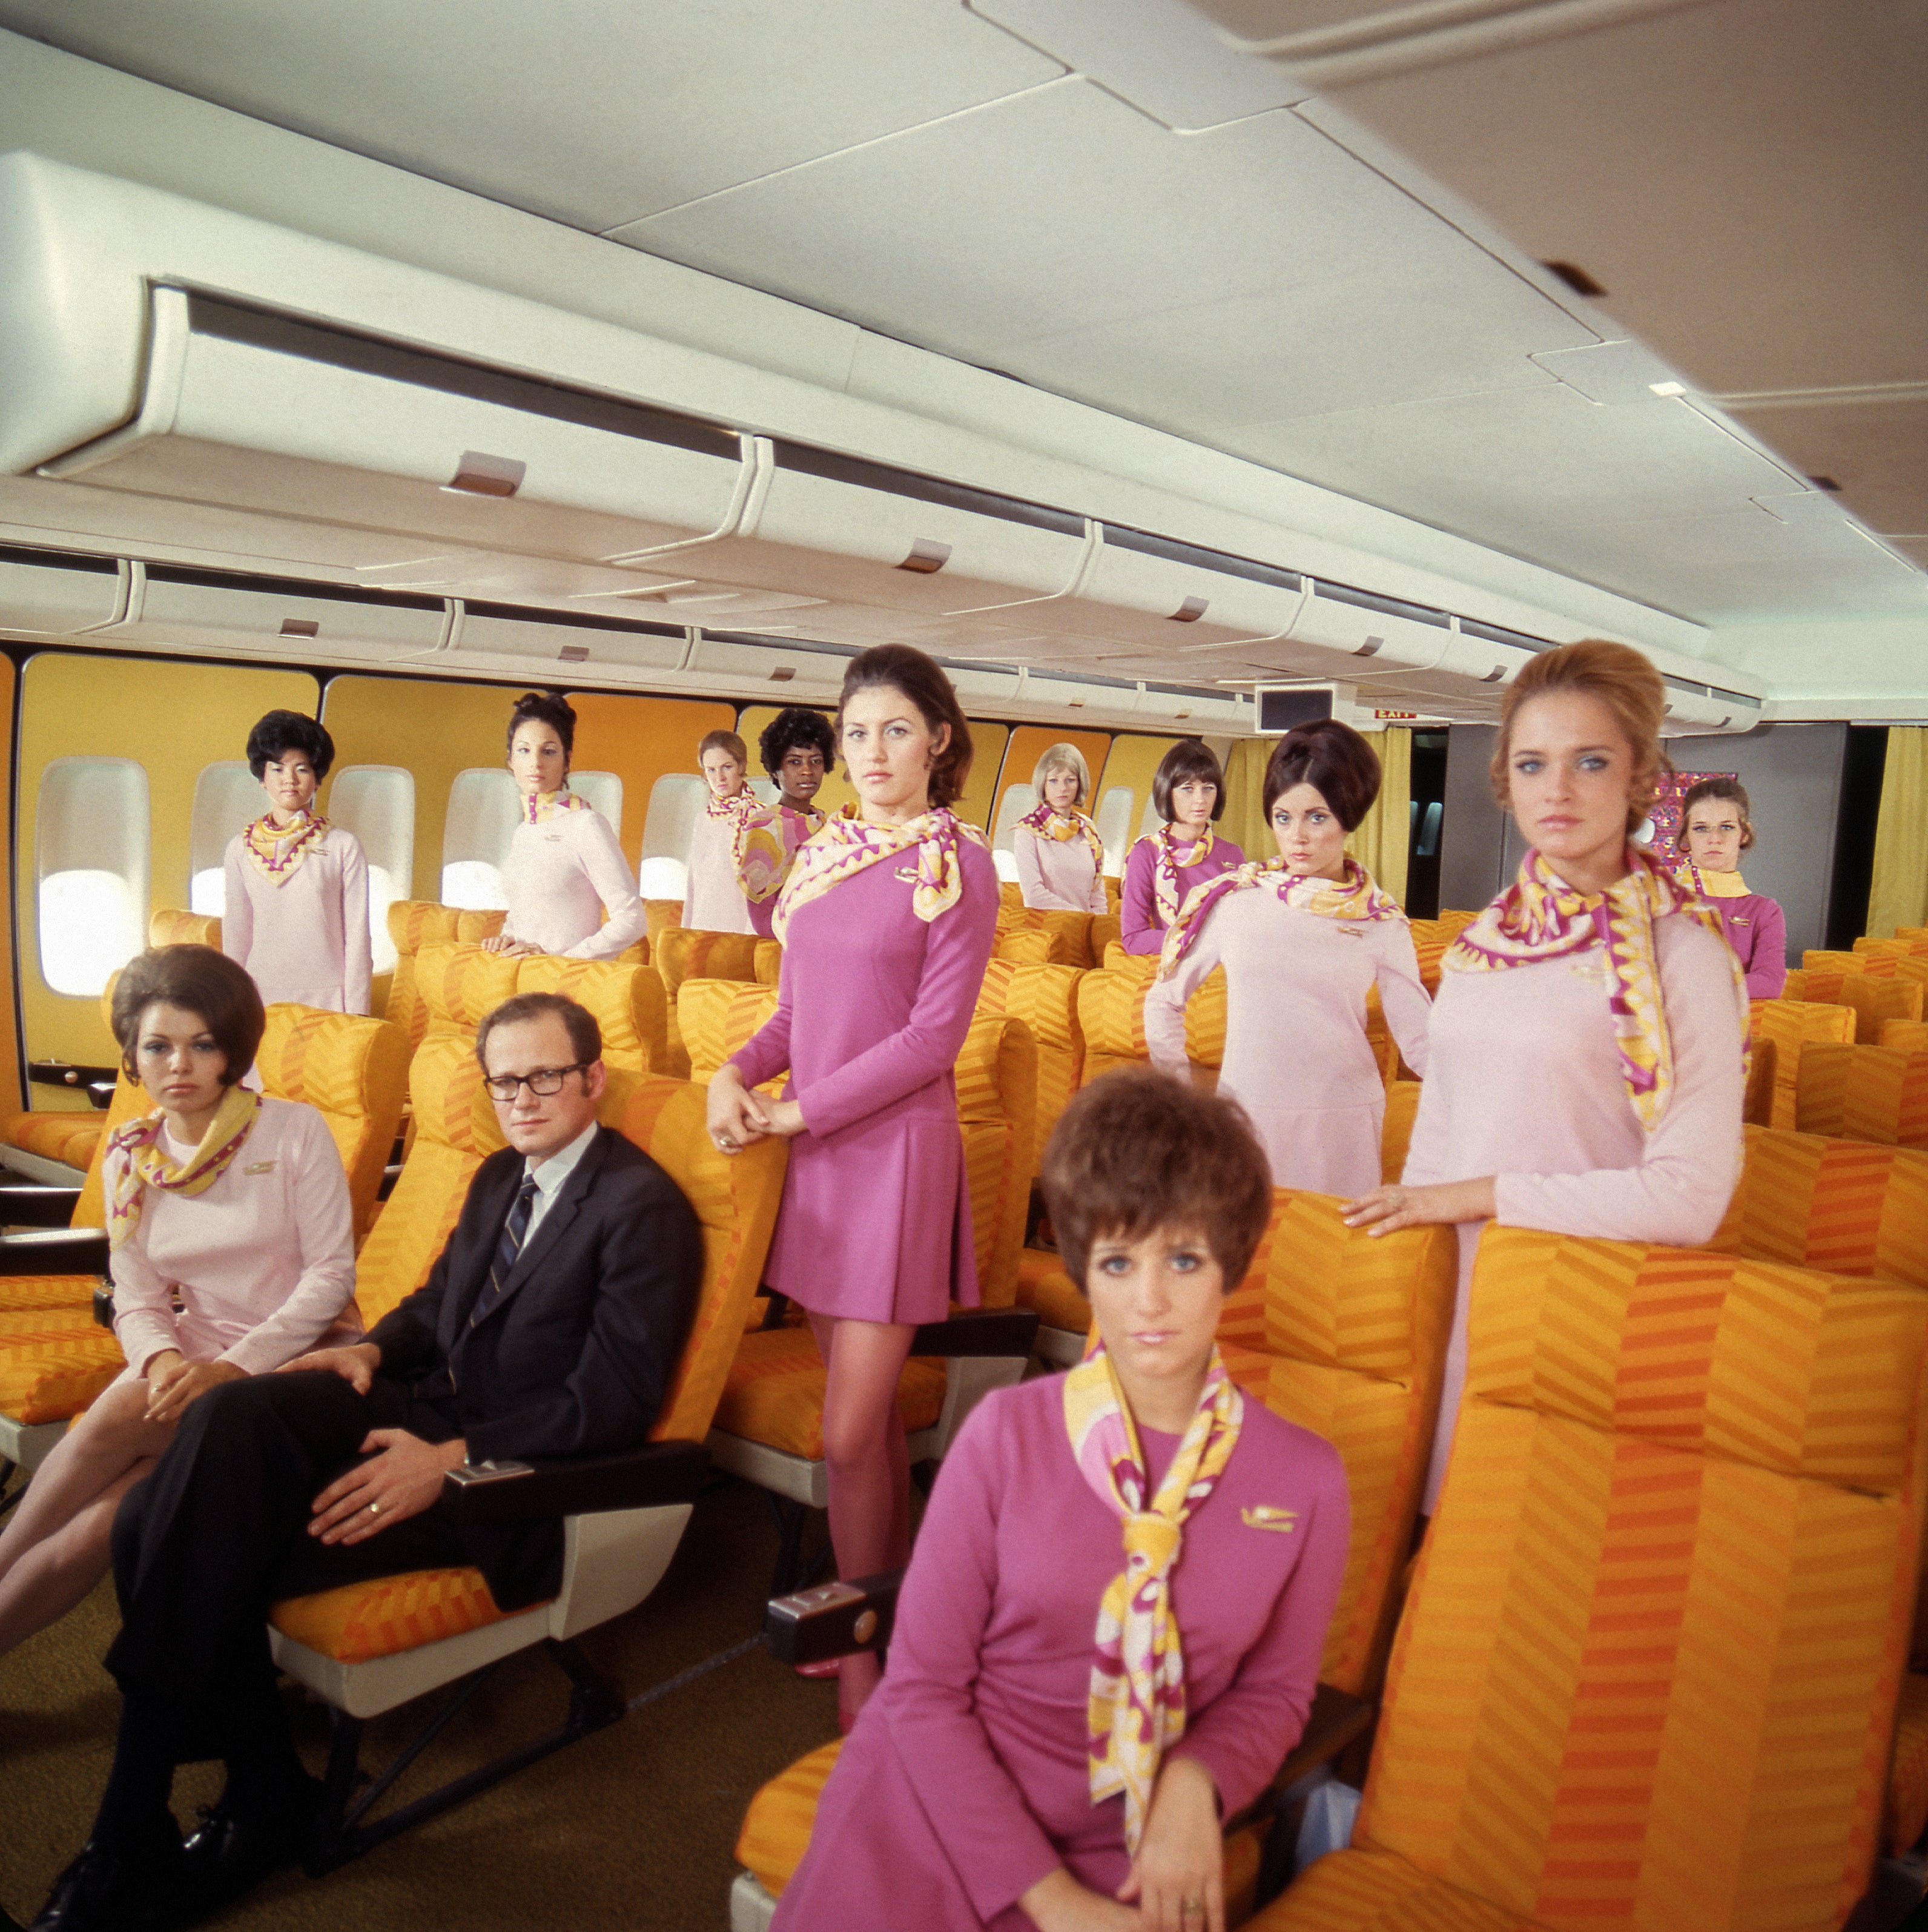 Braniff International Airways’ Chief Purser with hostesses in the first class section of the “747 Braniff Place” Boeing 747 widebody airliner  c. 1970